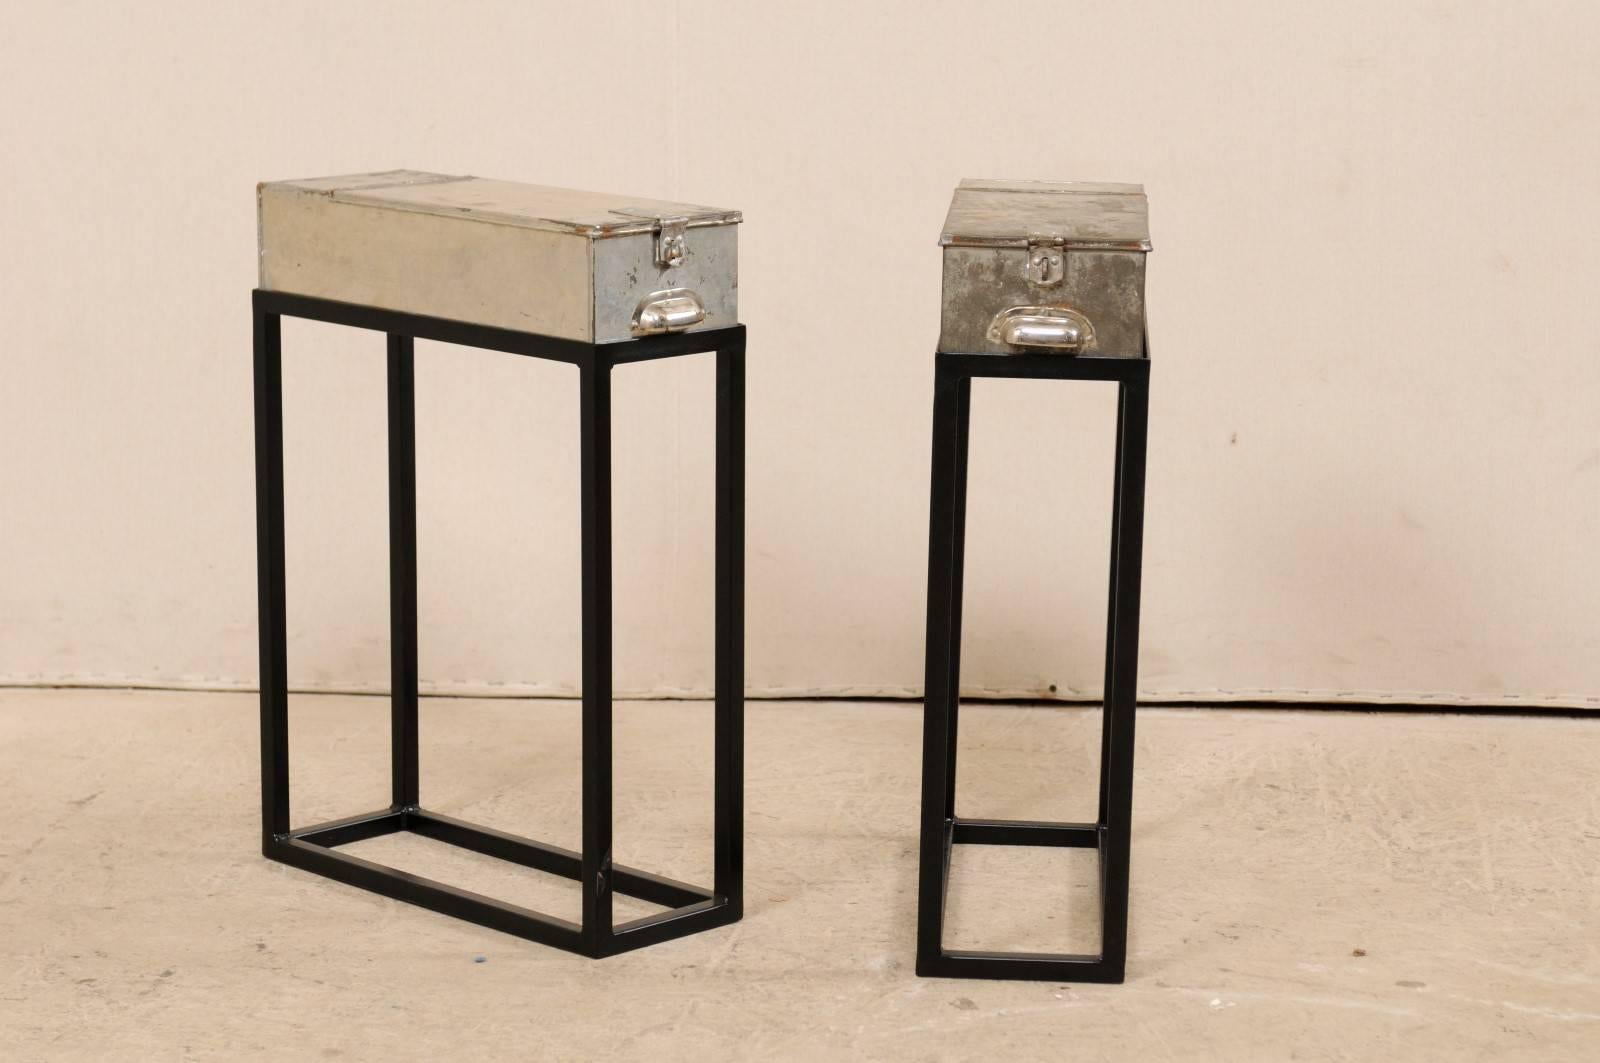 A pair of French vintage bank boxes on custom stands. This fun and whimsical pair of drinks or side tables have been fashioned out of vintage French silver metal bank boxes, re-purposed as tops, and set onto a custom black metal base. The tables